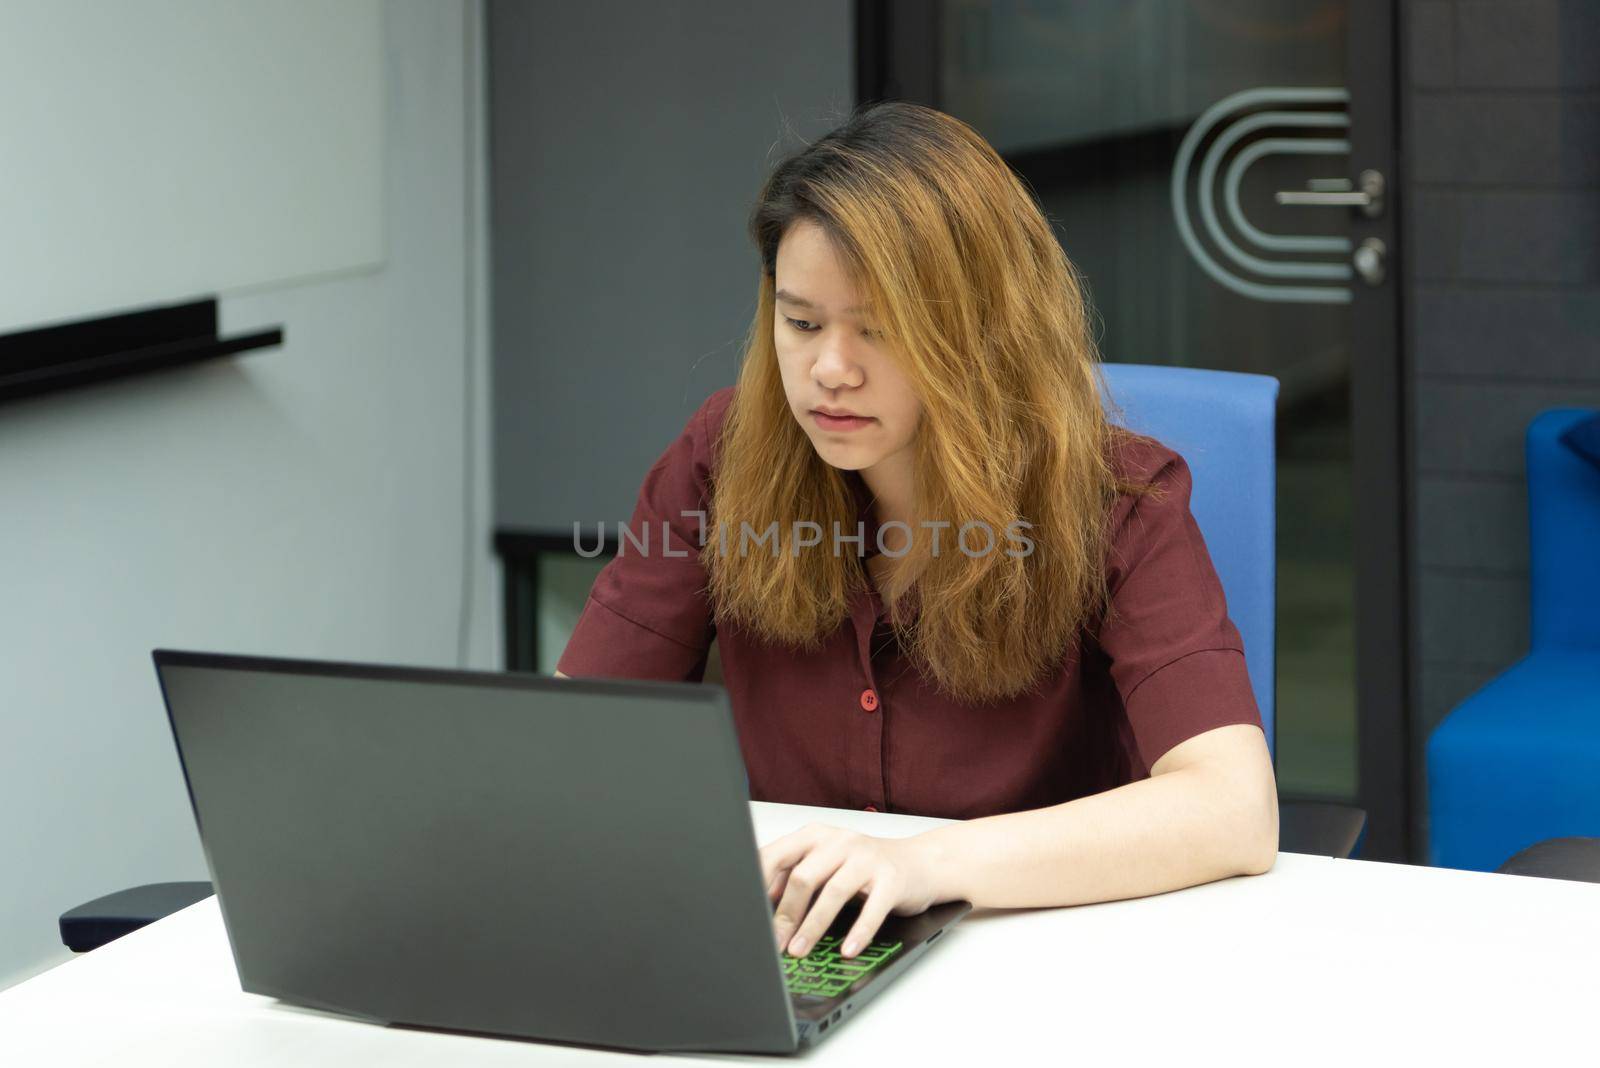 Asian woman is student,businesswoman working by computer notebook, laptop in office meeting room with whiteboard background with thinking, concentrate emotion in concept working woman,success in life